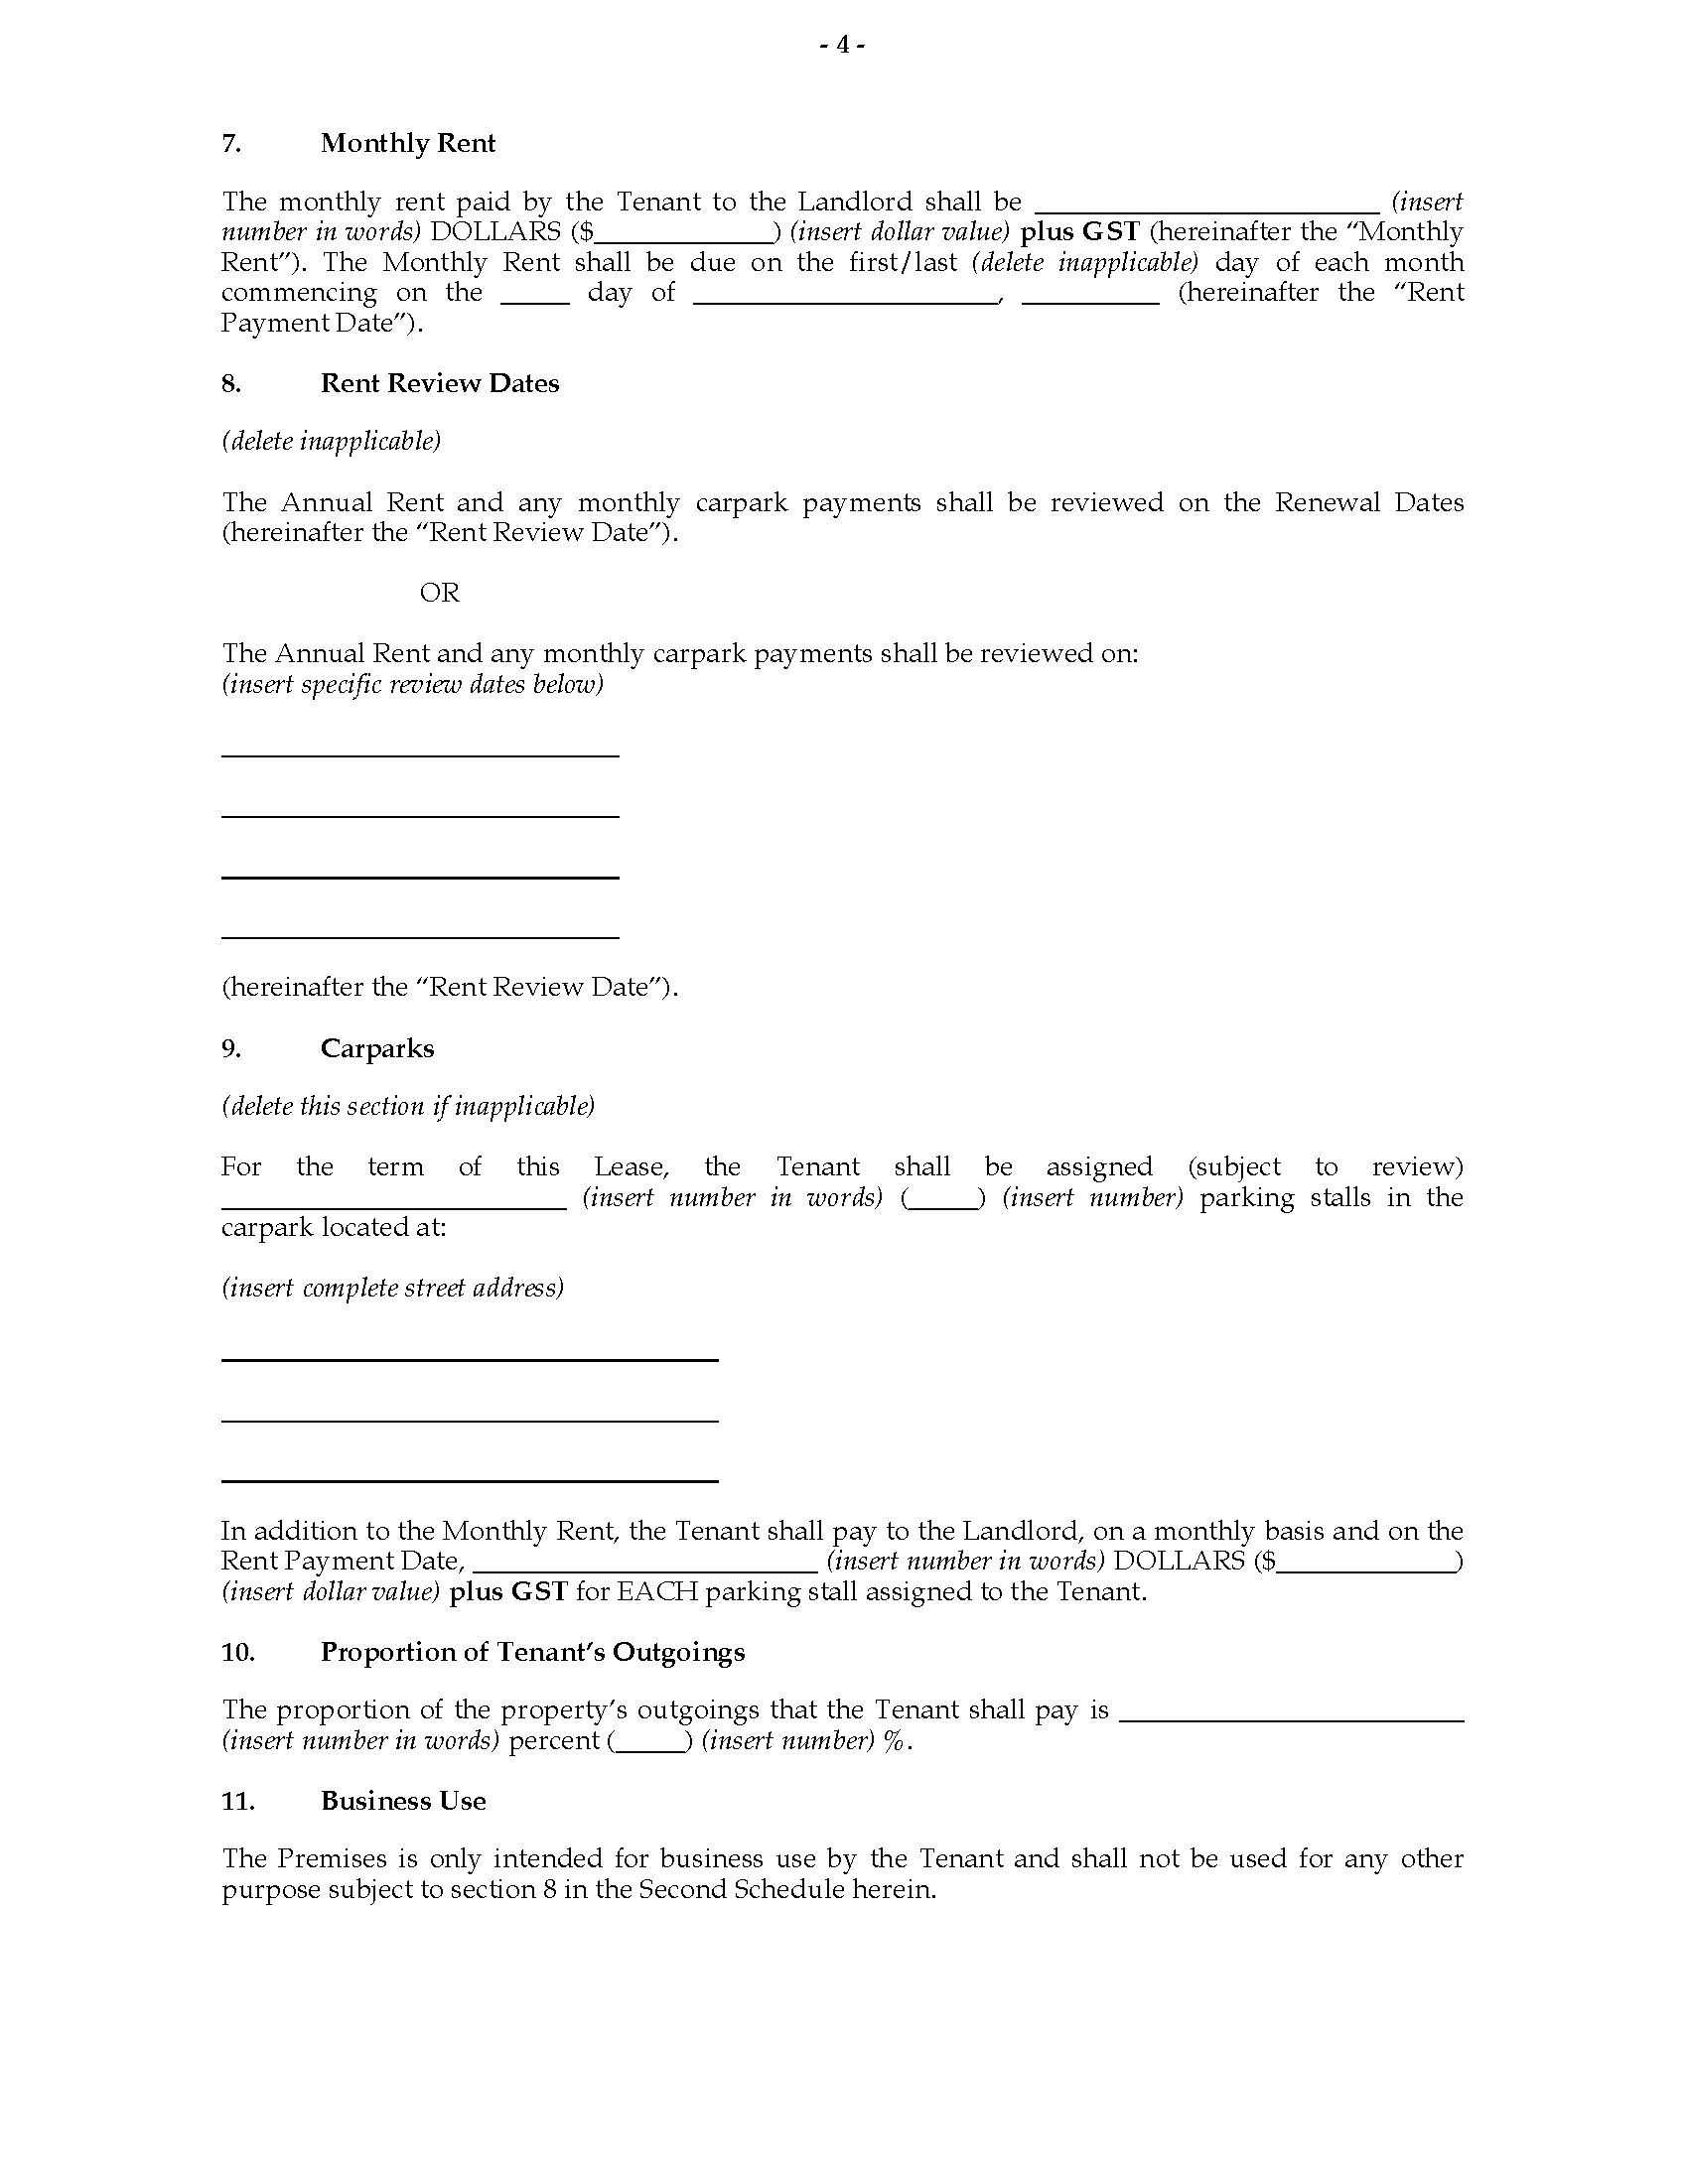 New Zealand Deed of Lease for Commercial Property  Legal Forms Intended For rental agreement template new zealand